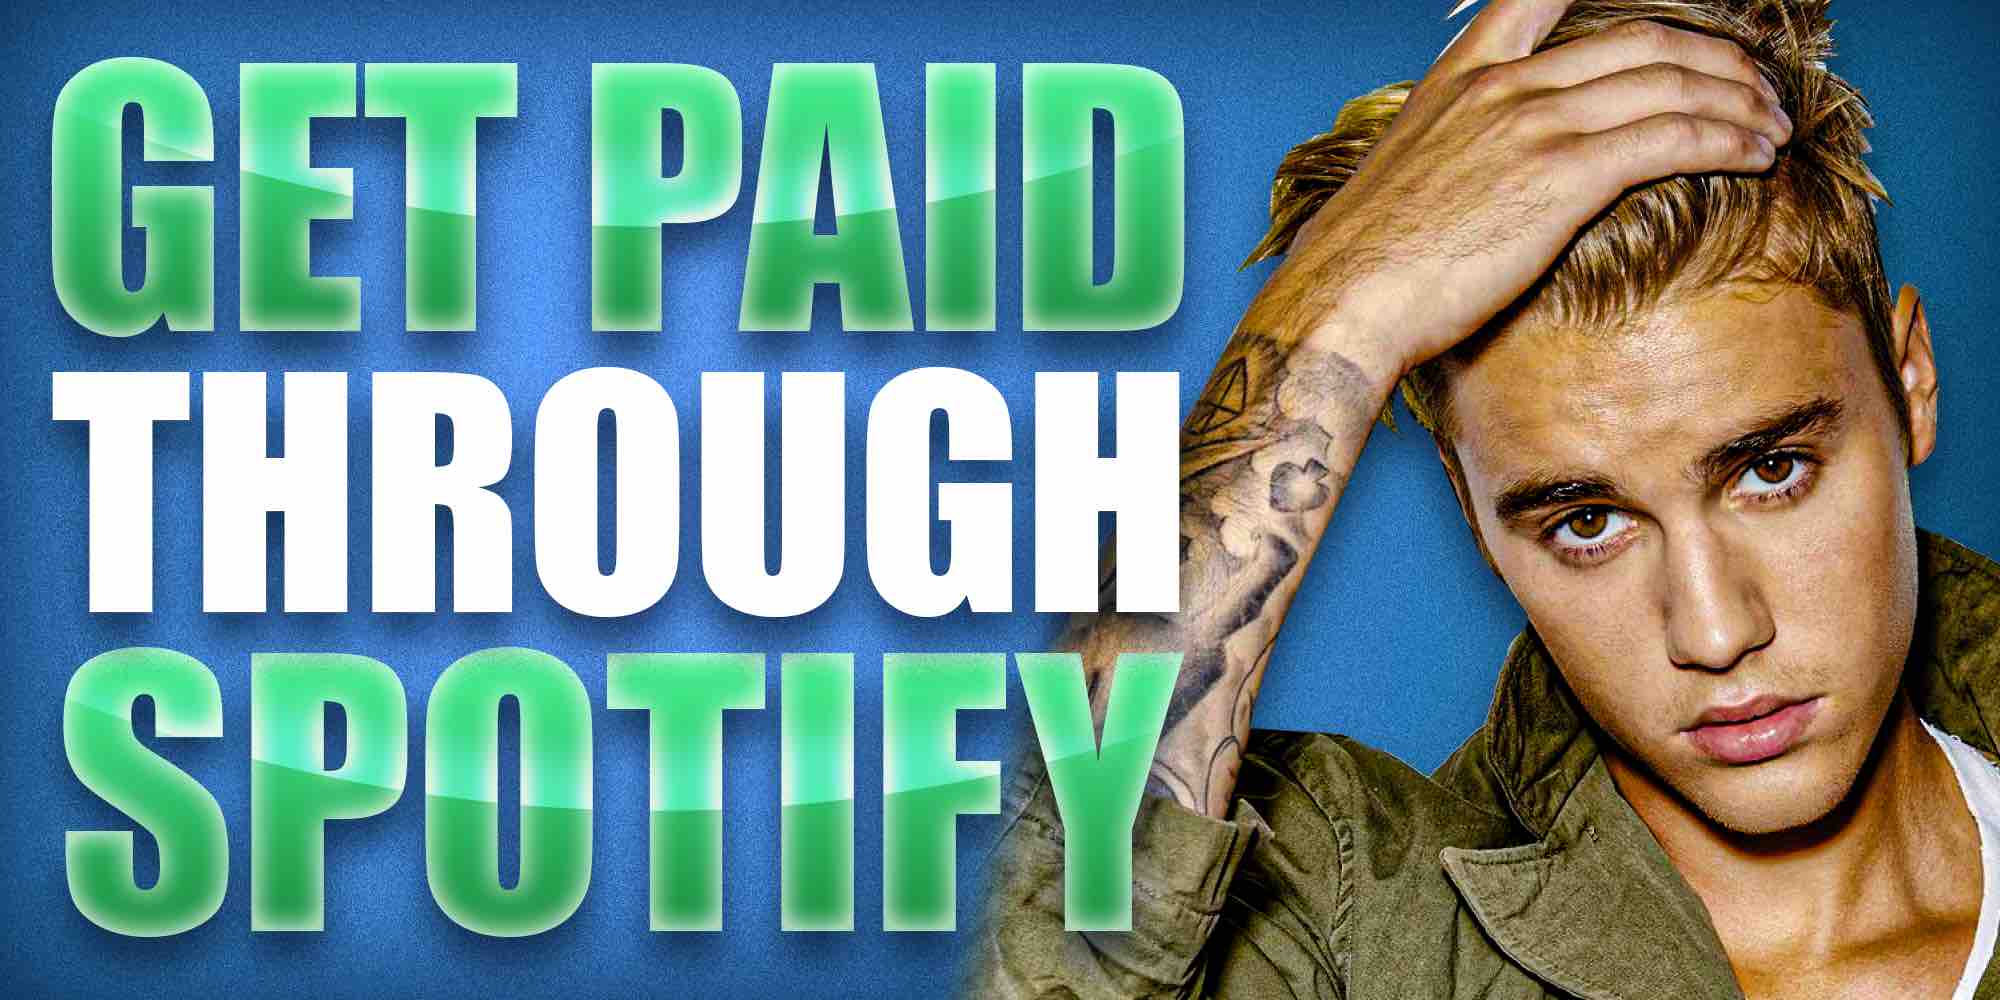 Get Paid Through Spotify ?width=5000&name=Get Paid Through Spotify 